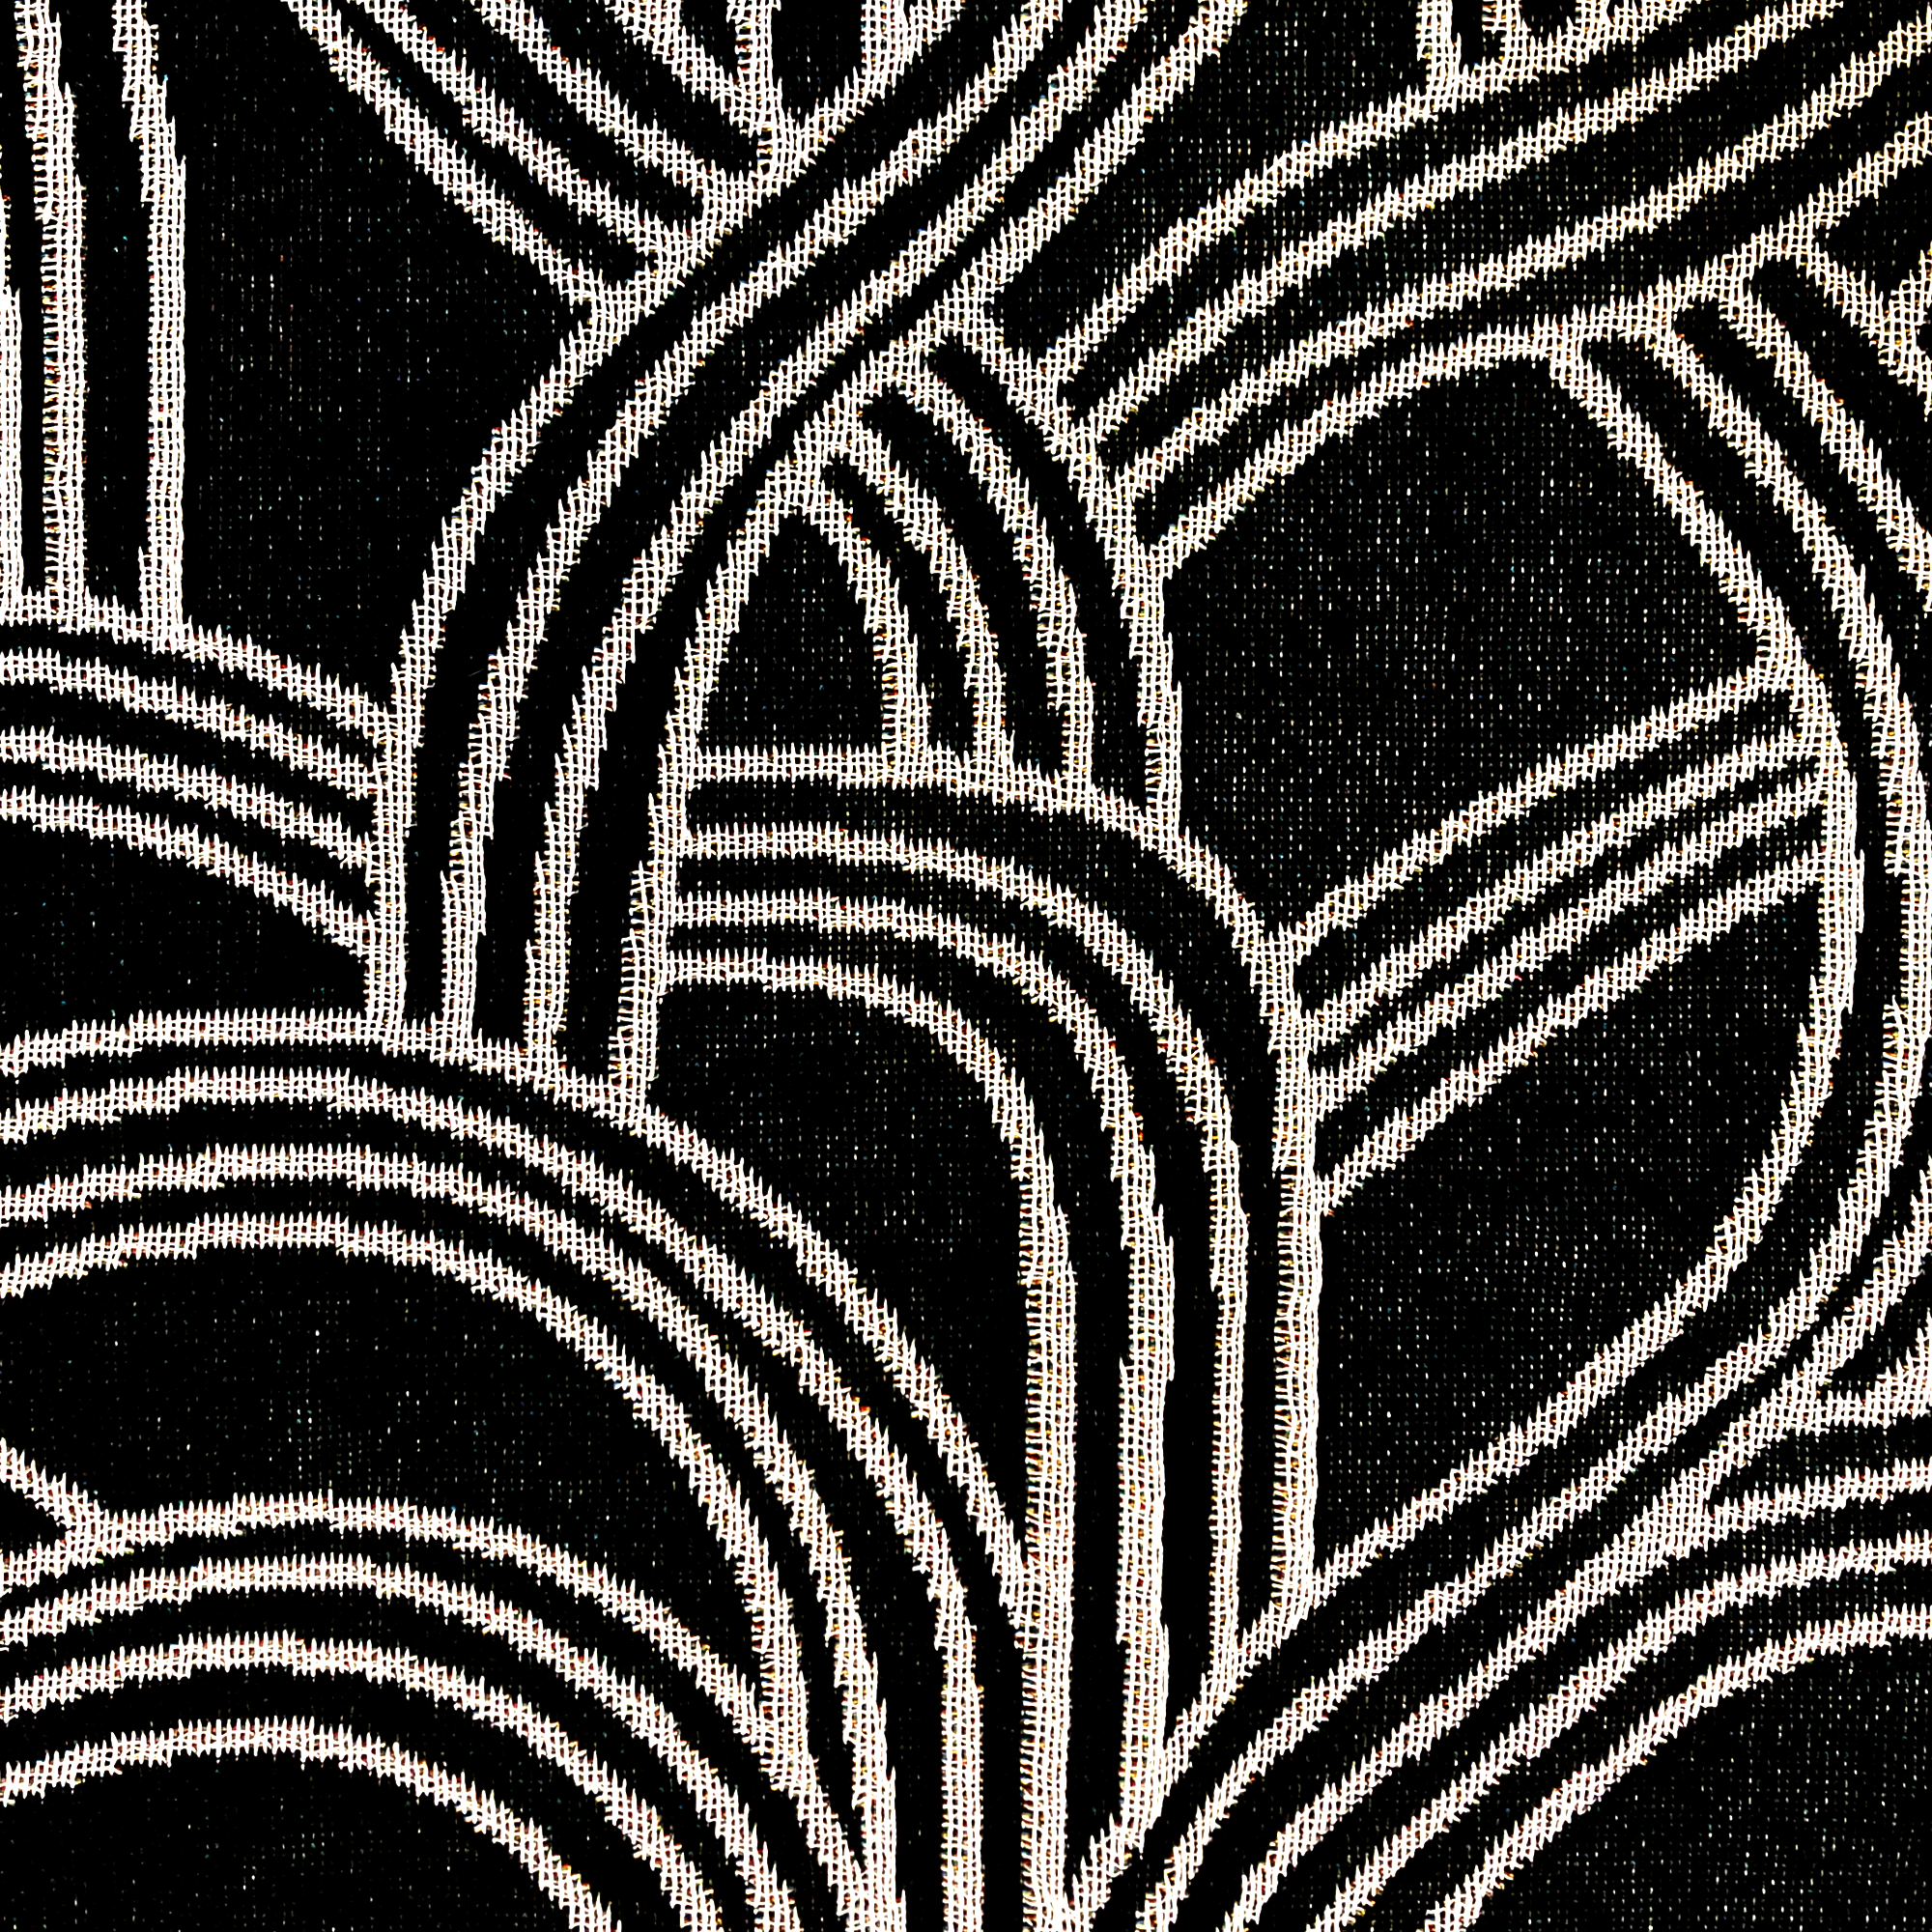 Detailed close-up of pattern inside the Oaklandish tree logo on a black throw blanket.